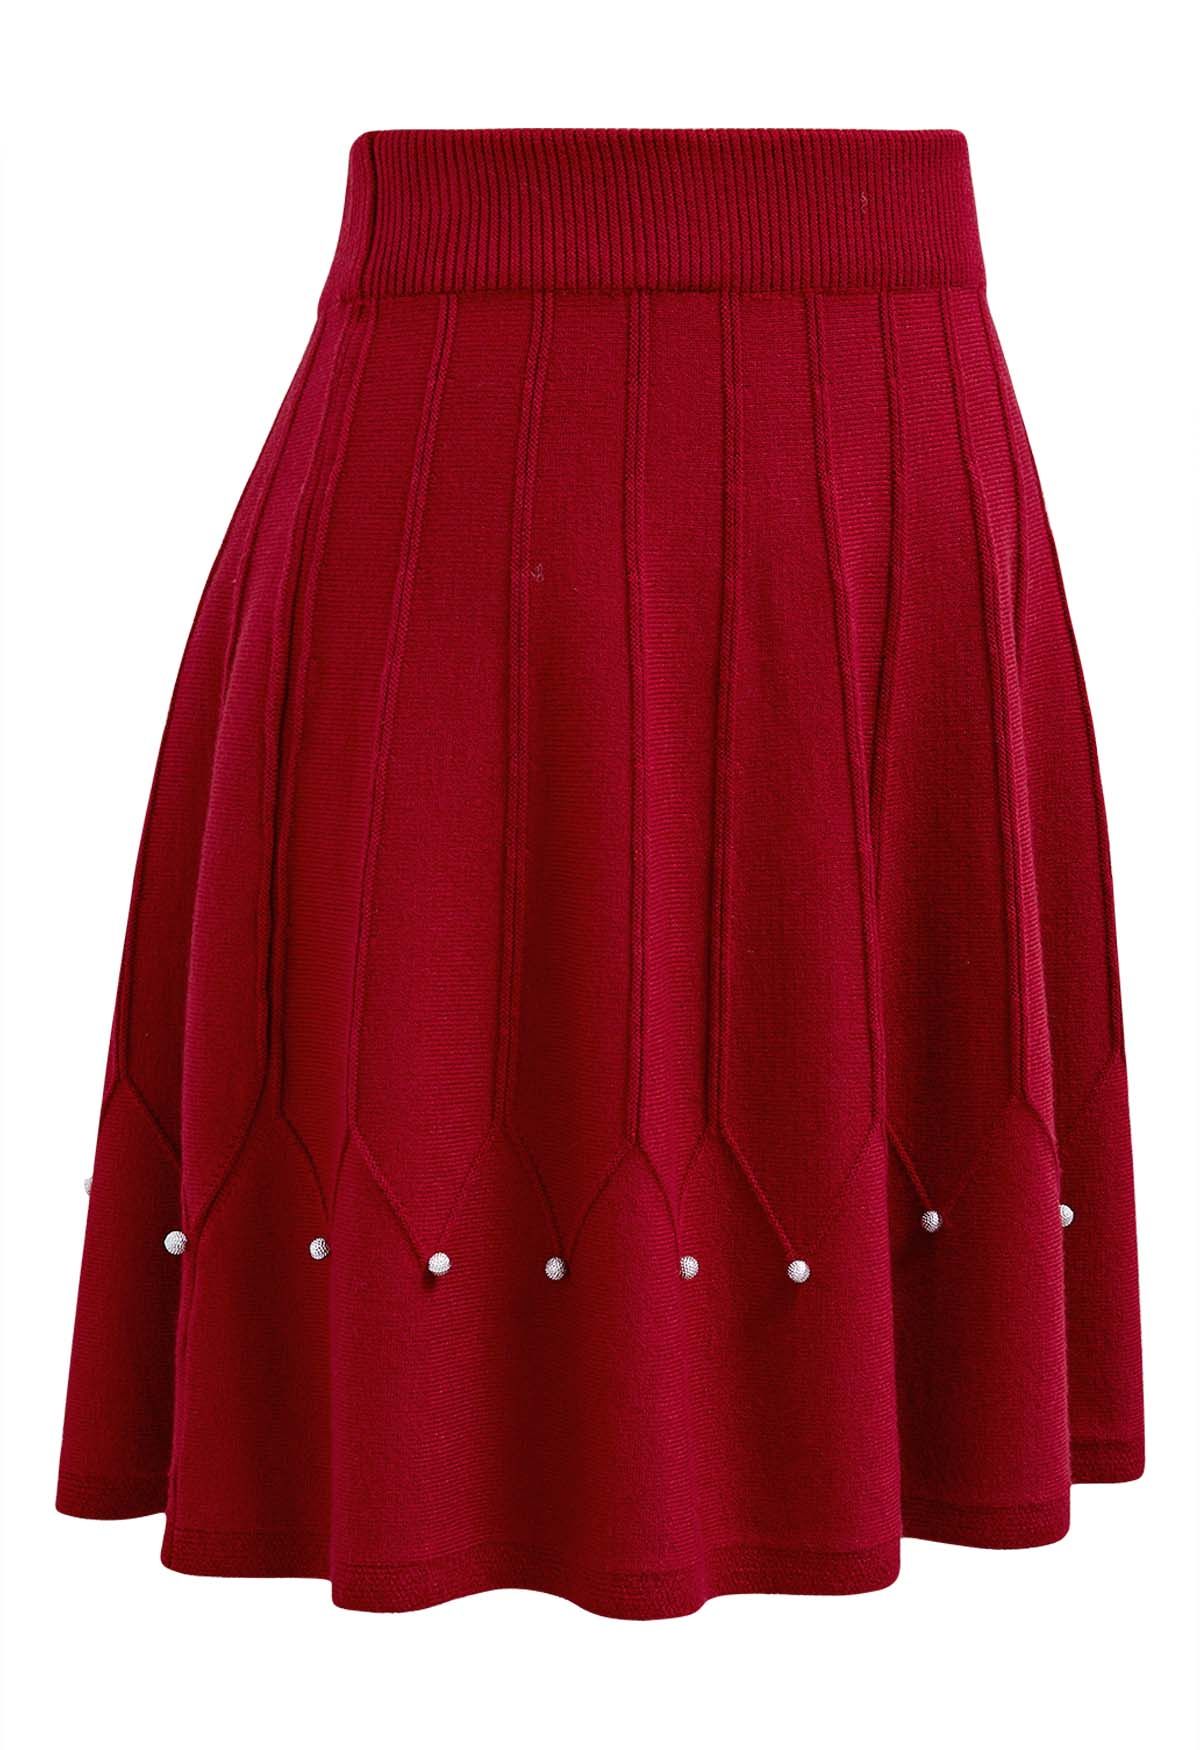 Silver Bead Embellished Seam Knit Skirt in Red